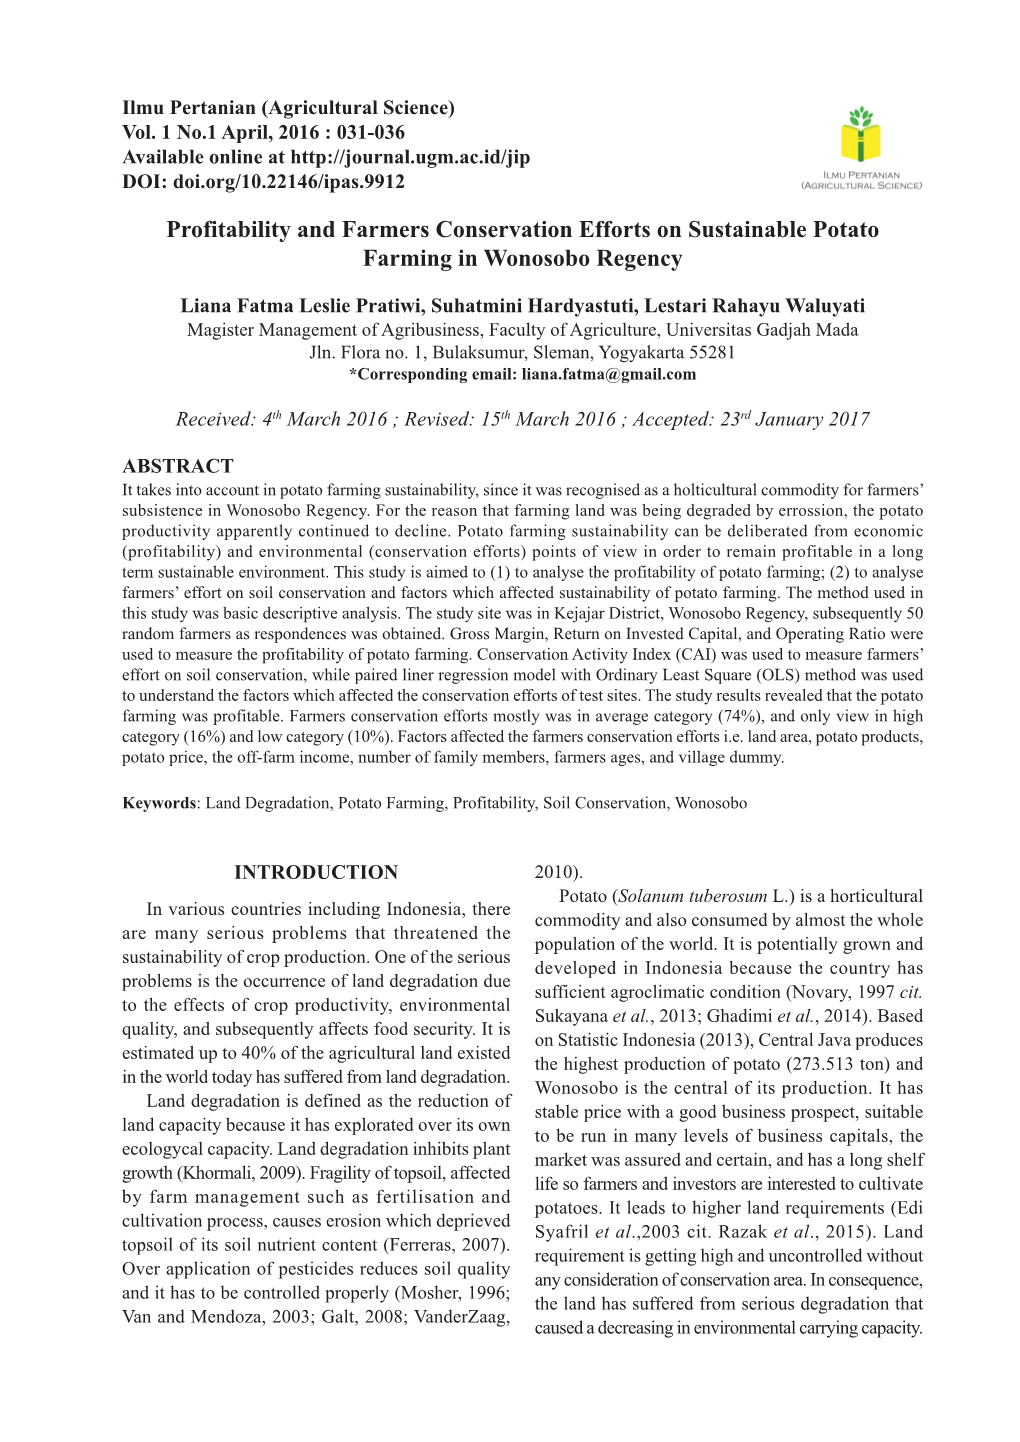 Profitability and Farmers Conservation Efforts on Sustainable Potato Farming in Wonosobo Regency